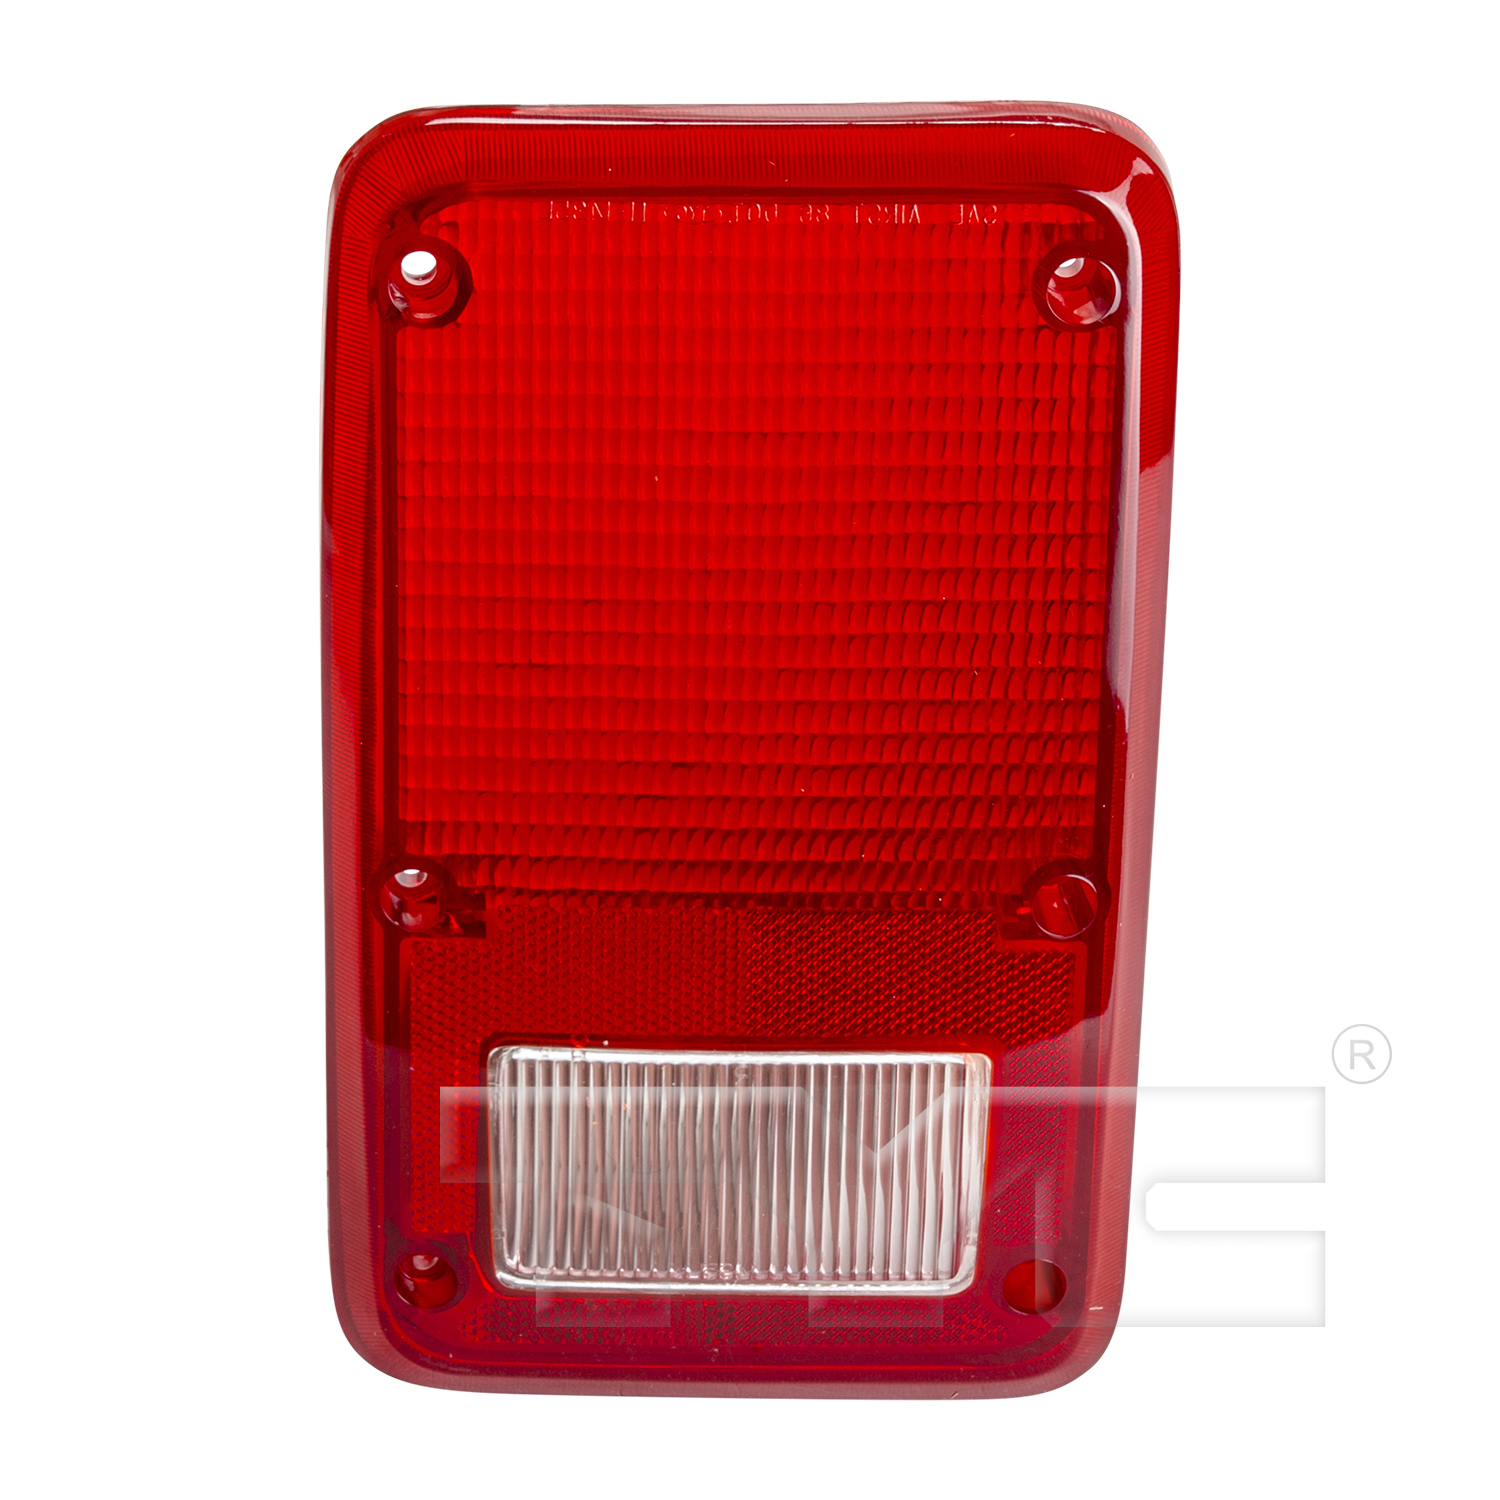 Aftermarket TAILLIGHTS for DODGE - B350, B350,81-93,LT Taillamp lens